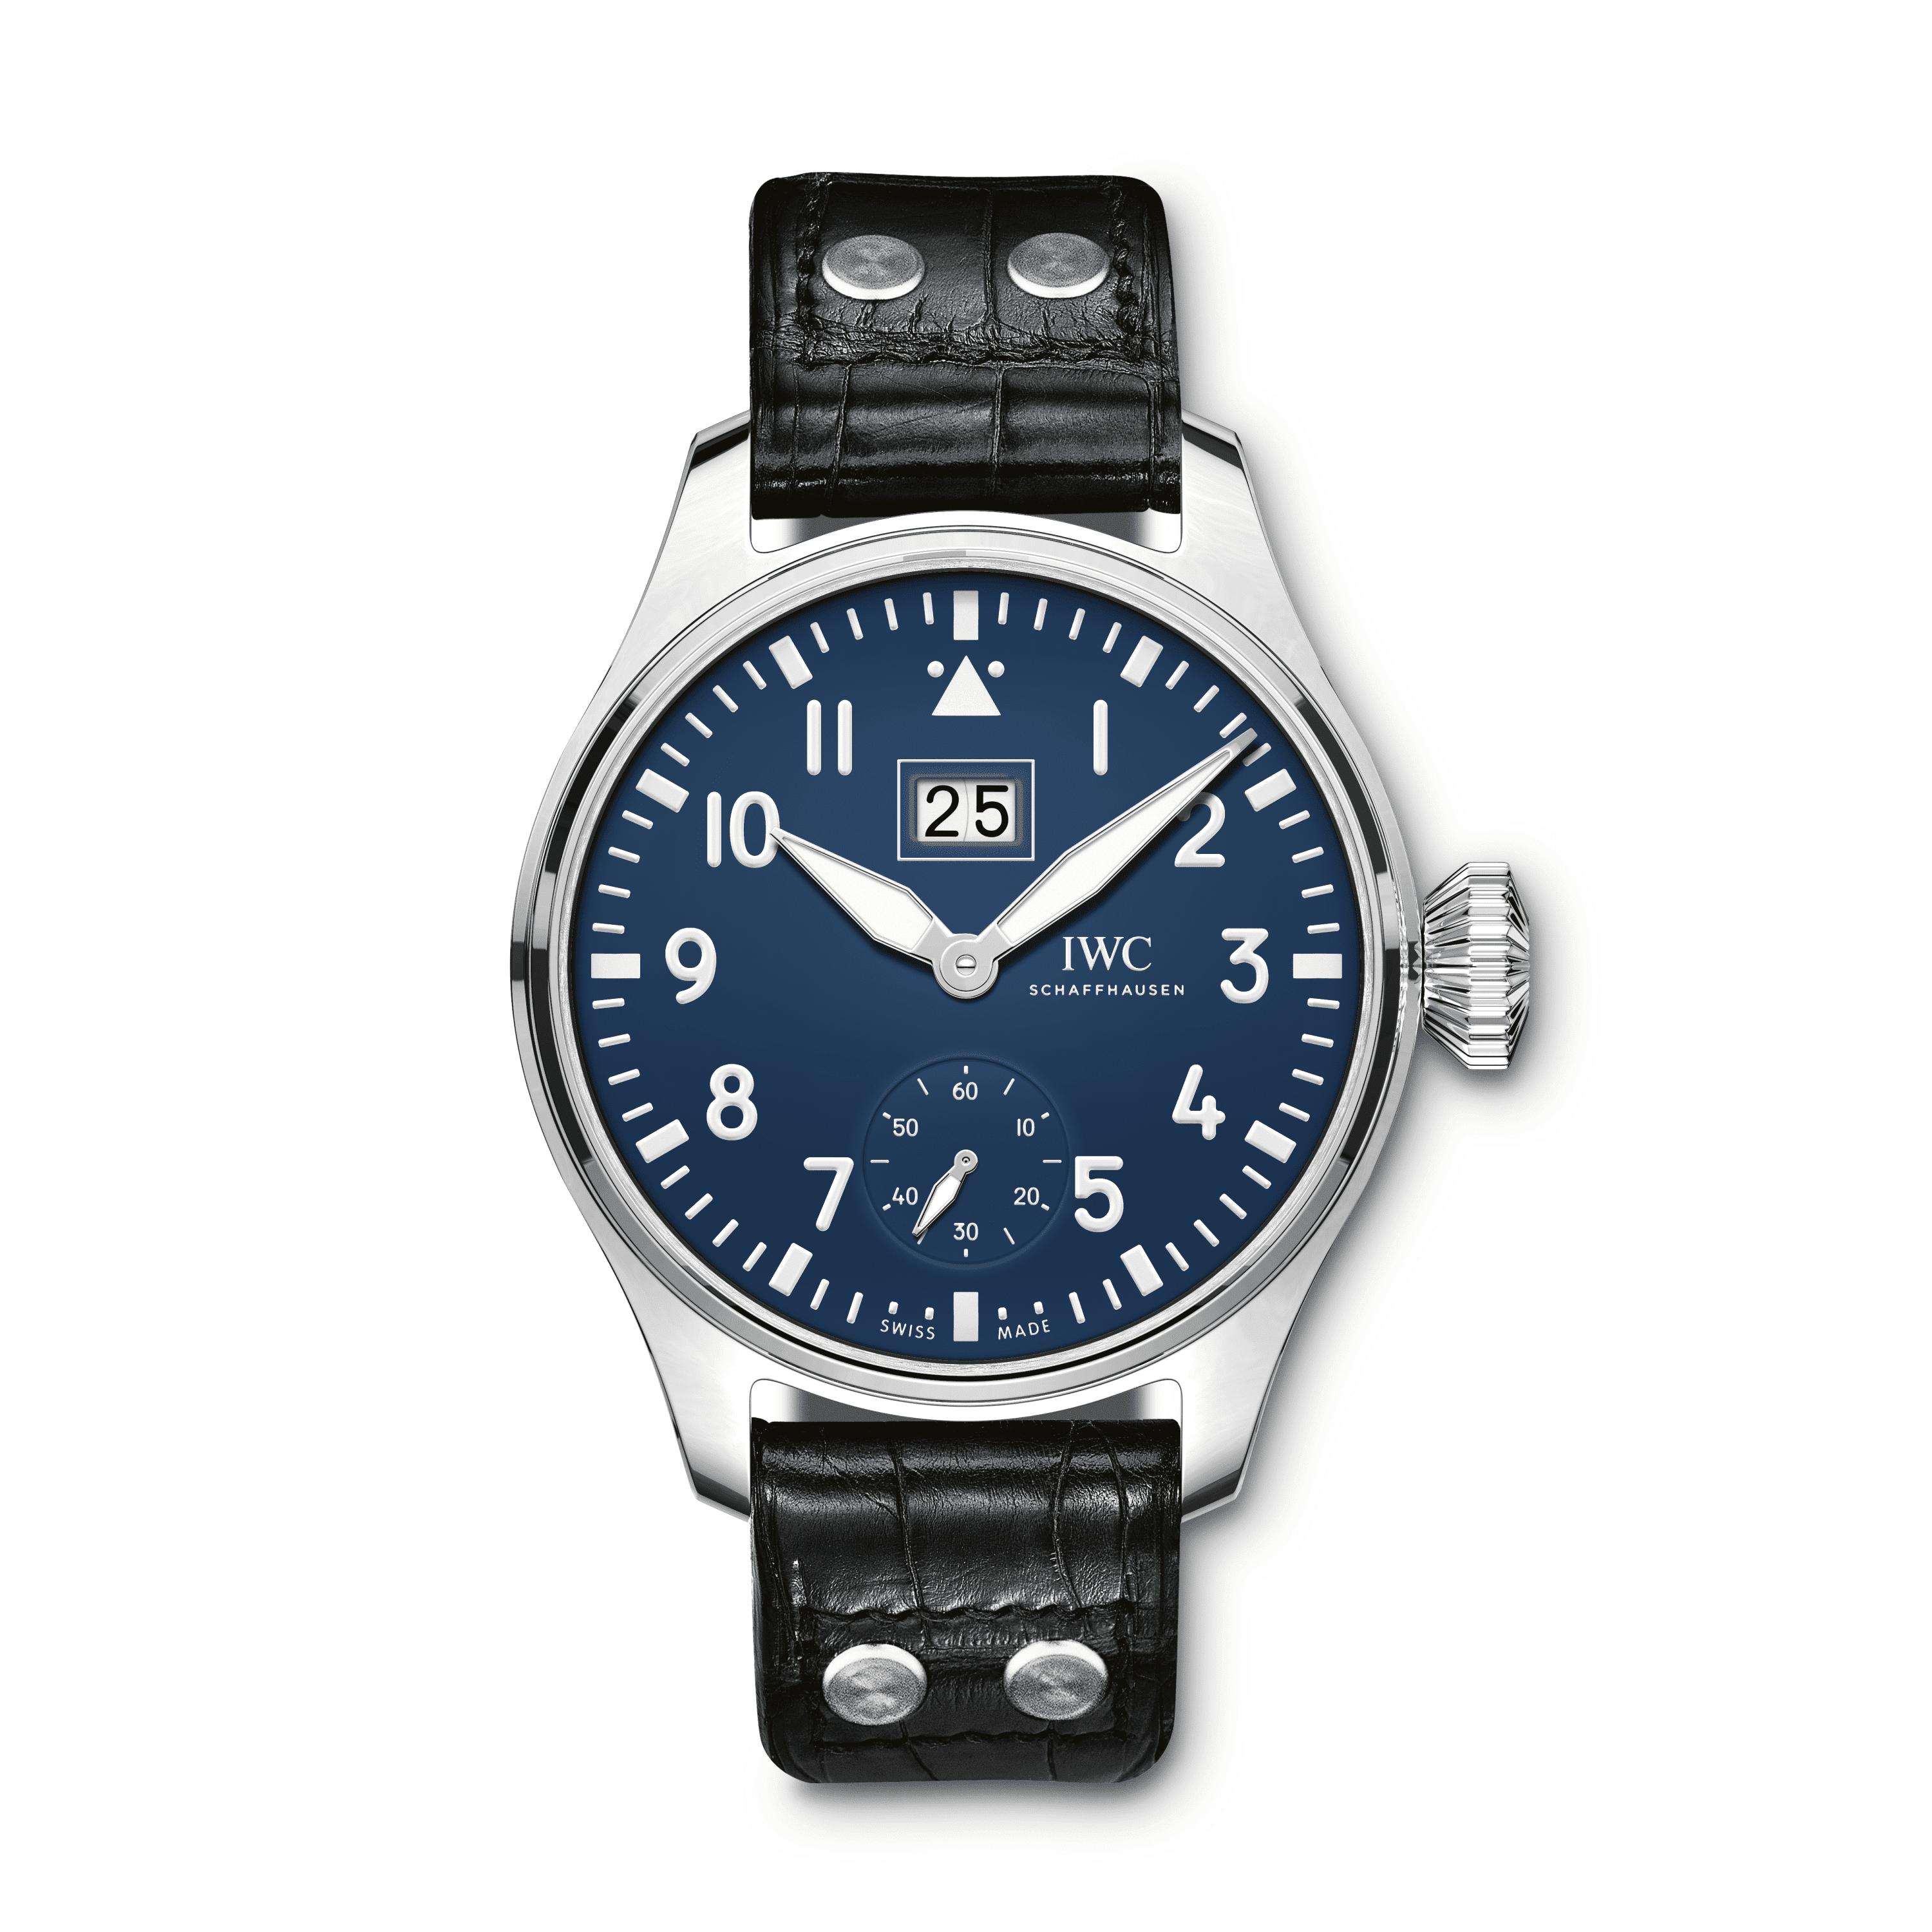 Big Pilot - Big Date - 150 year years On Strap with Blue Arabic Dial - only 150pcs Made